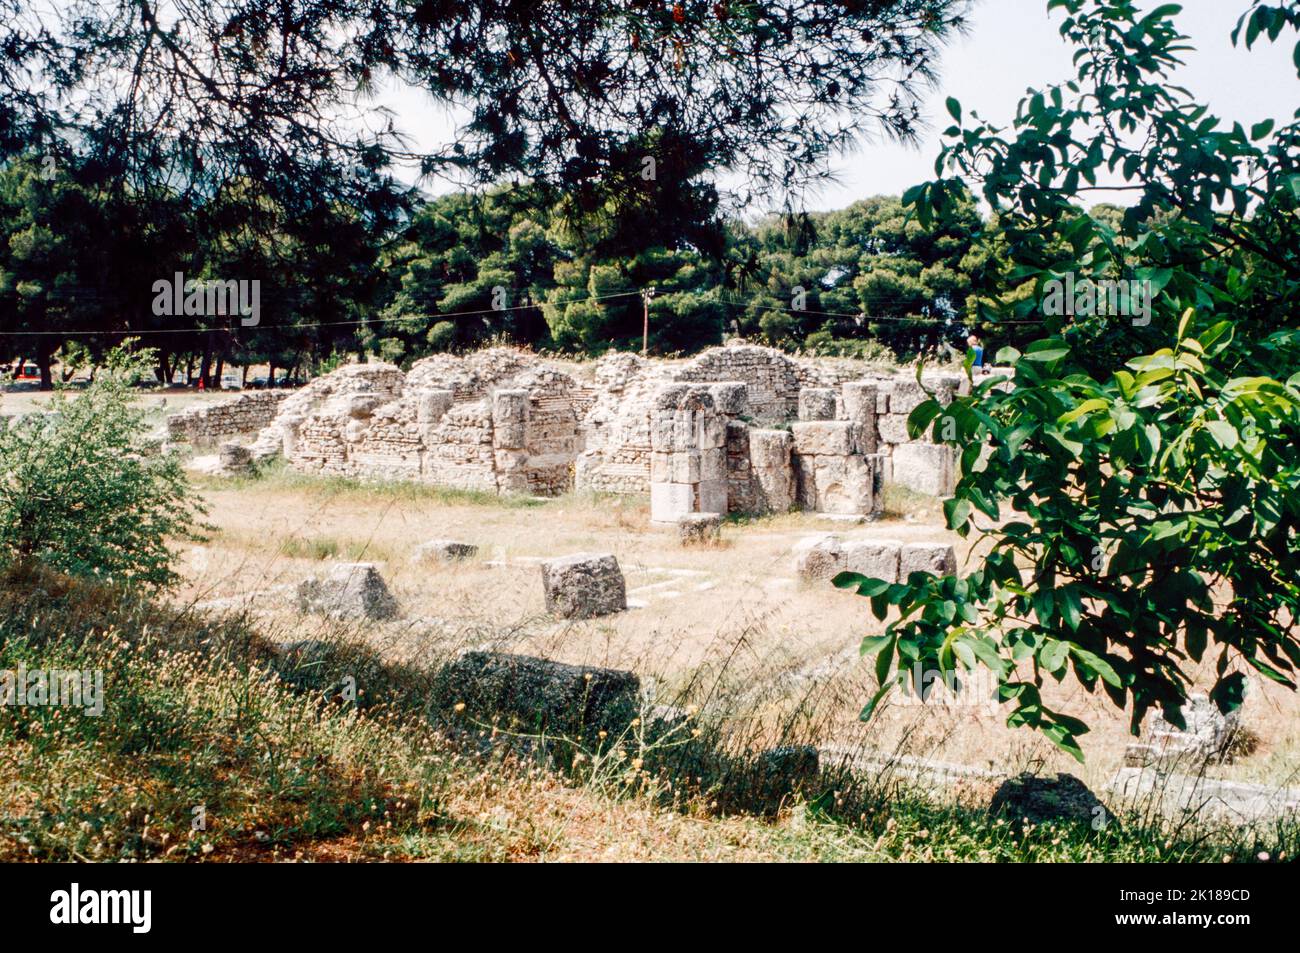 Gymnasion at Epidaurus - a small city (polis) in ancient Greece, on the Argolid Peninsula at the Saronic Gulf, best known for its ancient Greek sanctuary. March 1980. Archival scan from a slide. Stock Photo